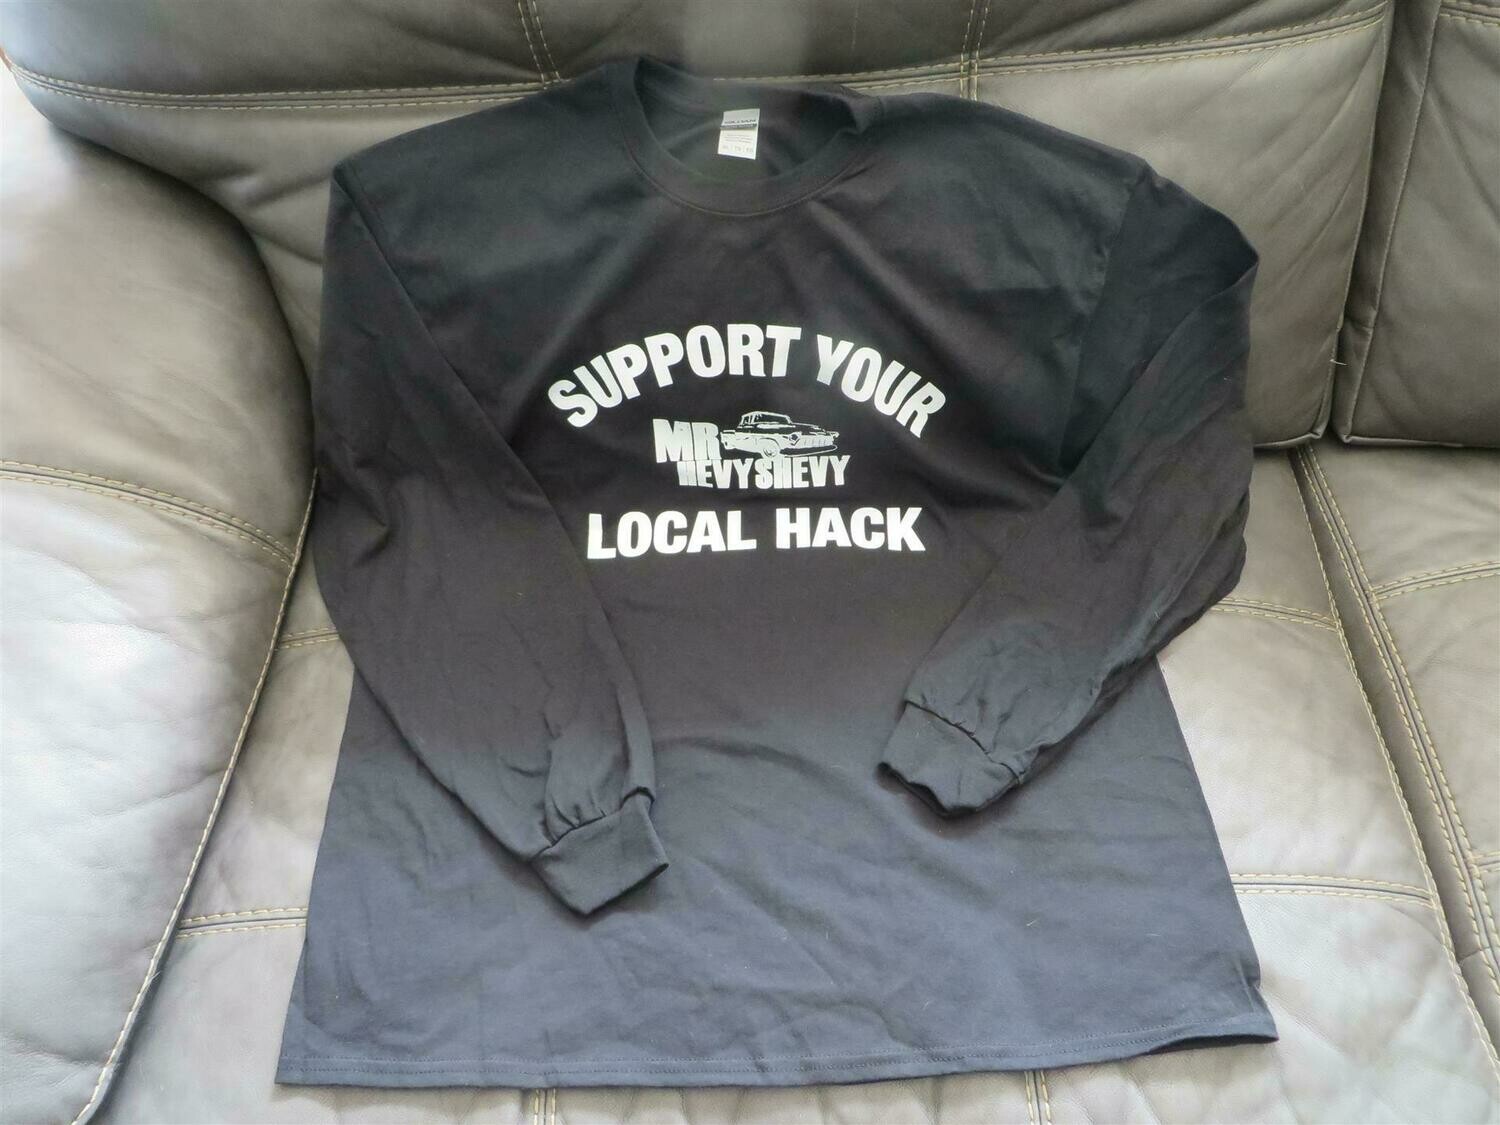 Support Your Local Hack - "Mrhevyshevy" - Long Sleeve Shirts - Black w/ White